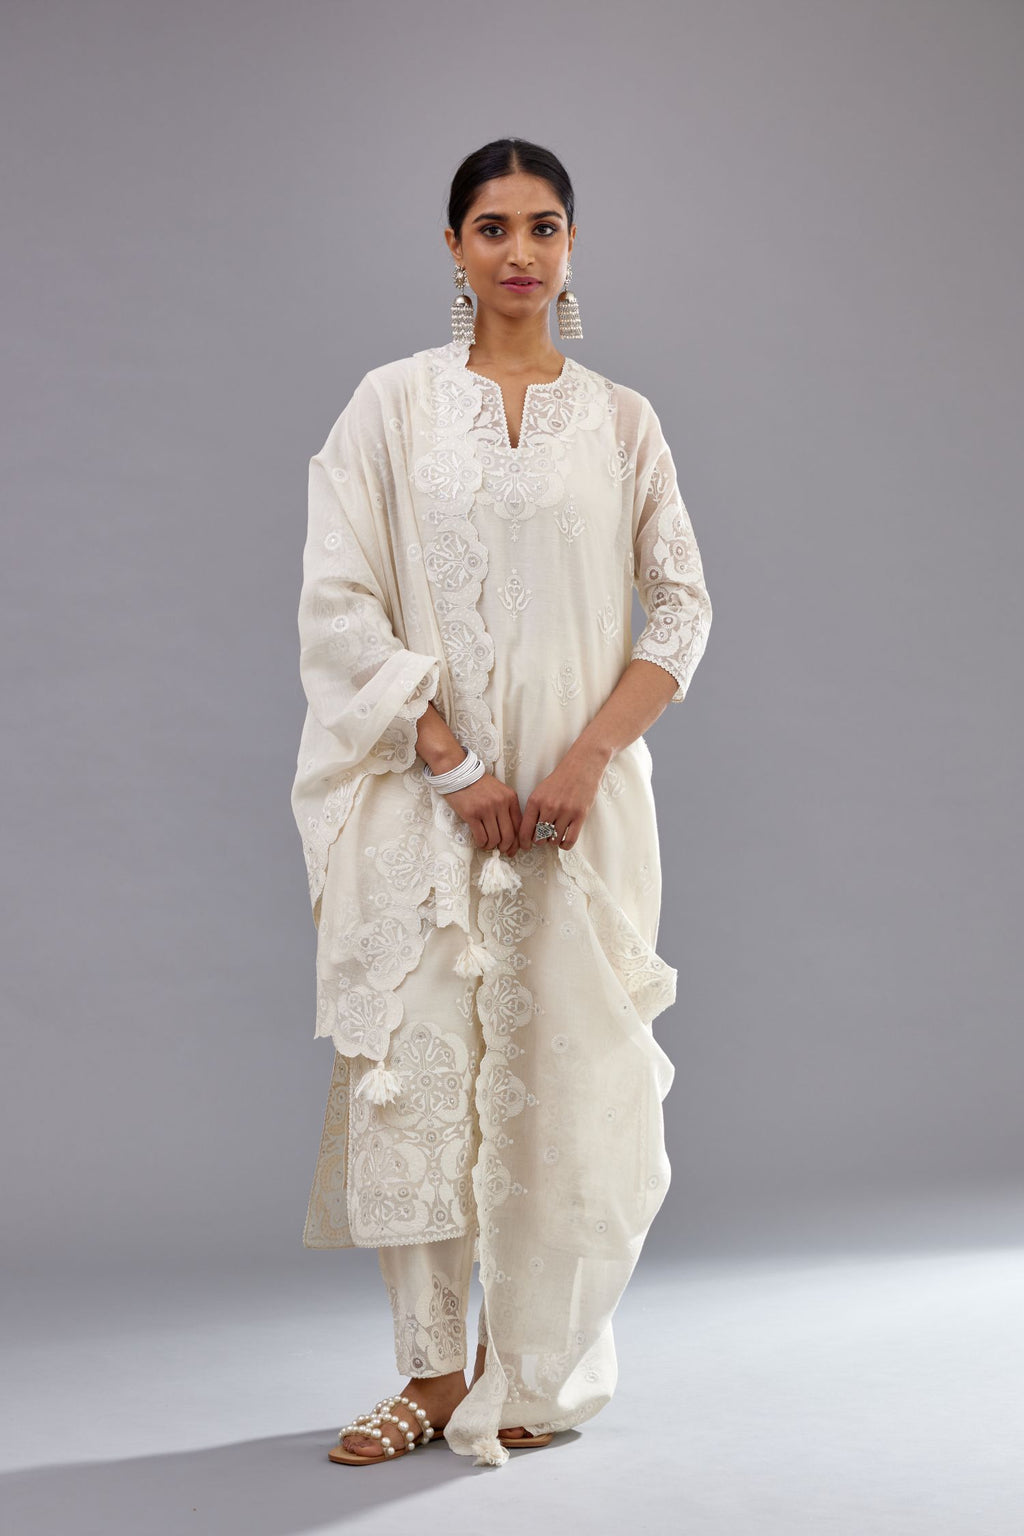 Off white cotton chanderi straight kurta set with cotton appliqué, highlighted with sequins.